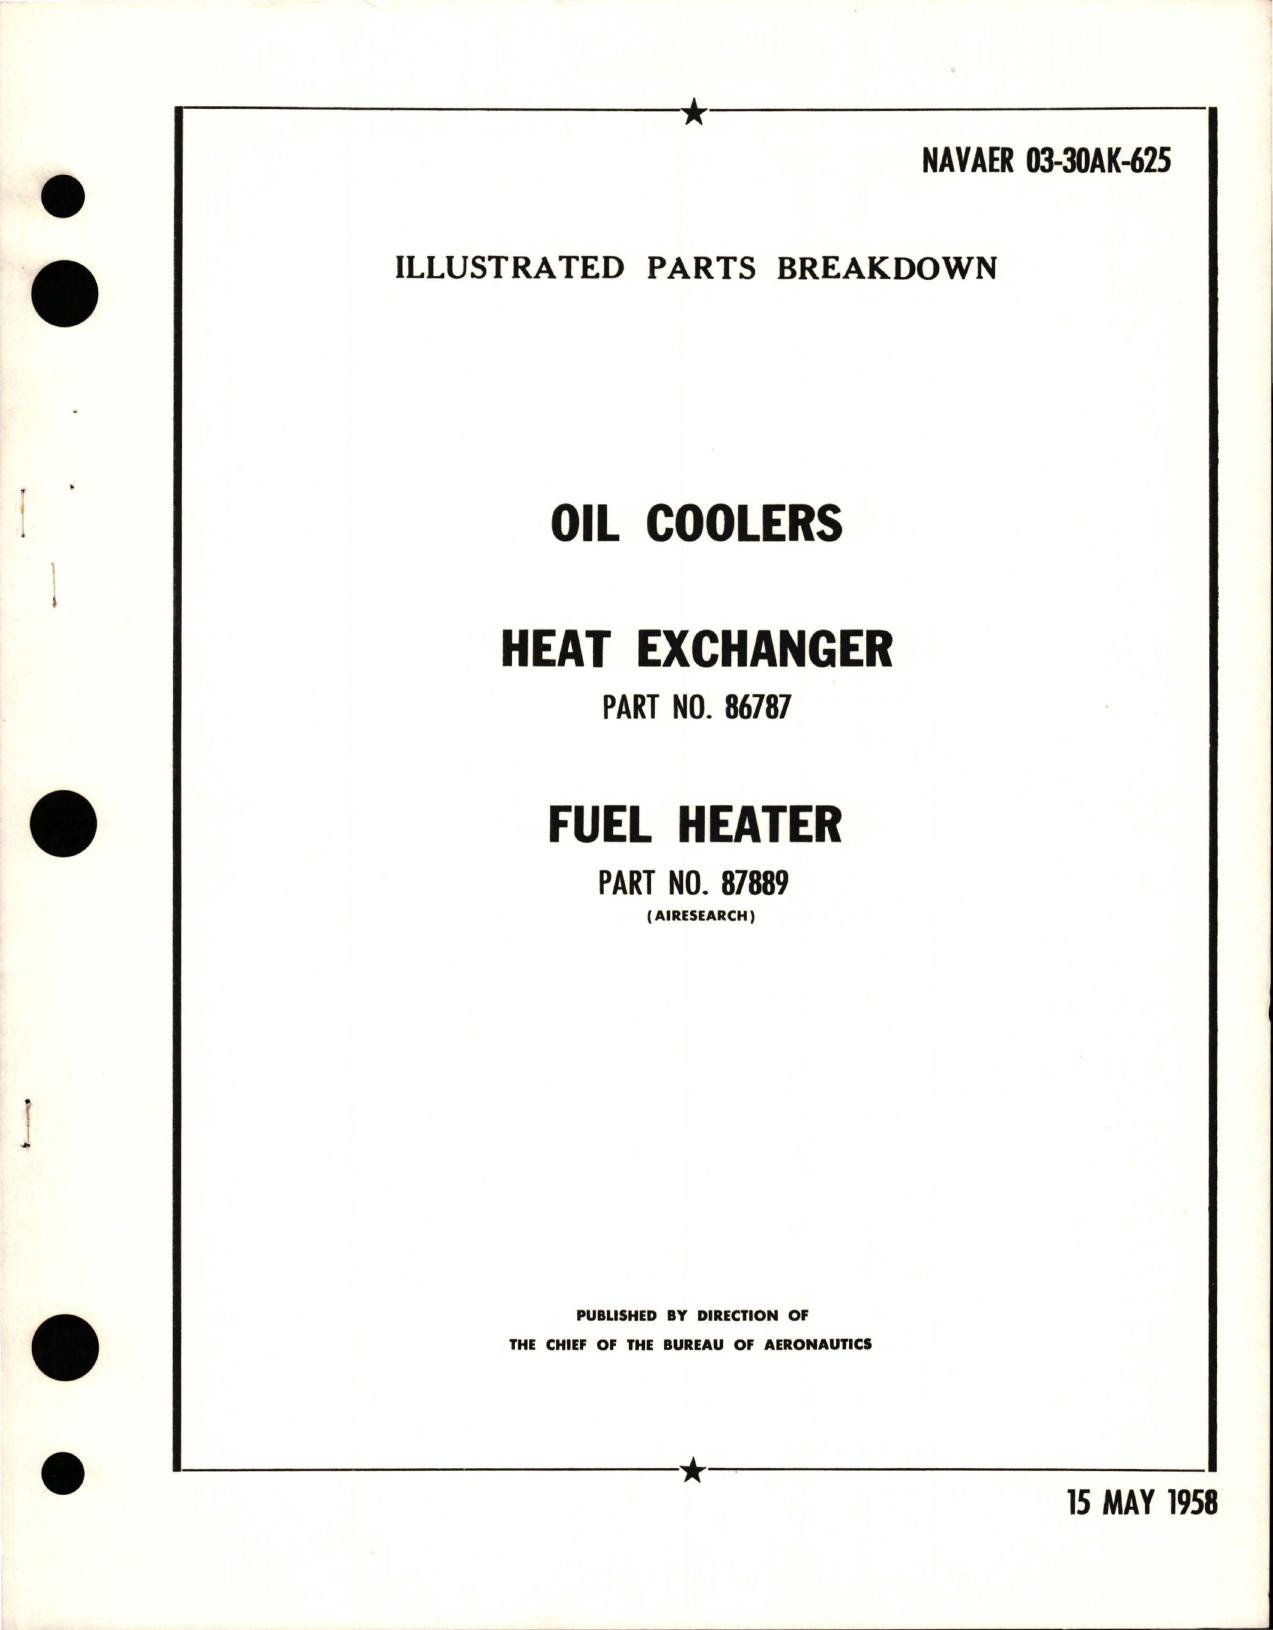 Sample page 1 from AirCorps Library document: Illustrated Parts Breakdown for Oil Coolers, Heat Exchanger and Fuel Heater - Parts 86787 and 87889